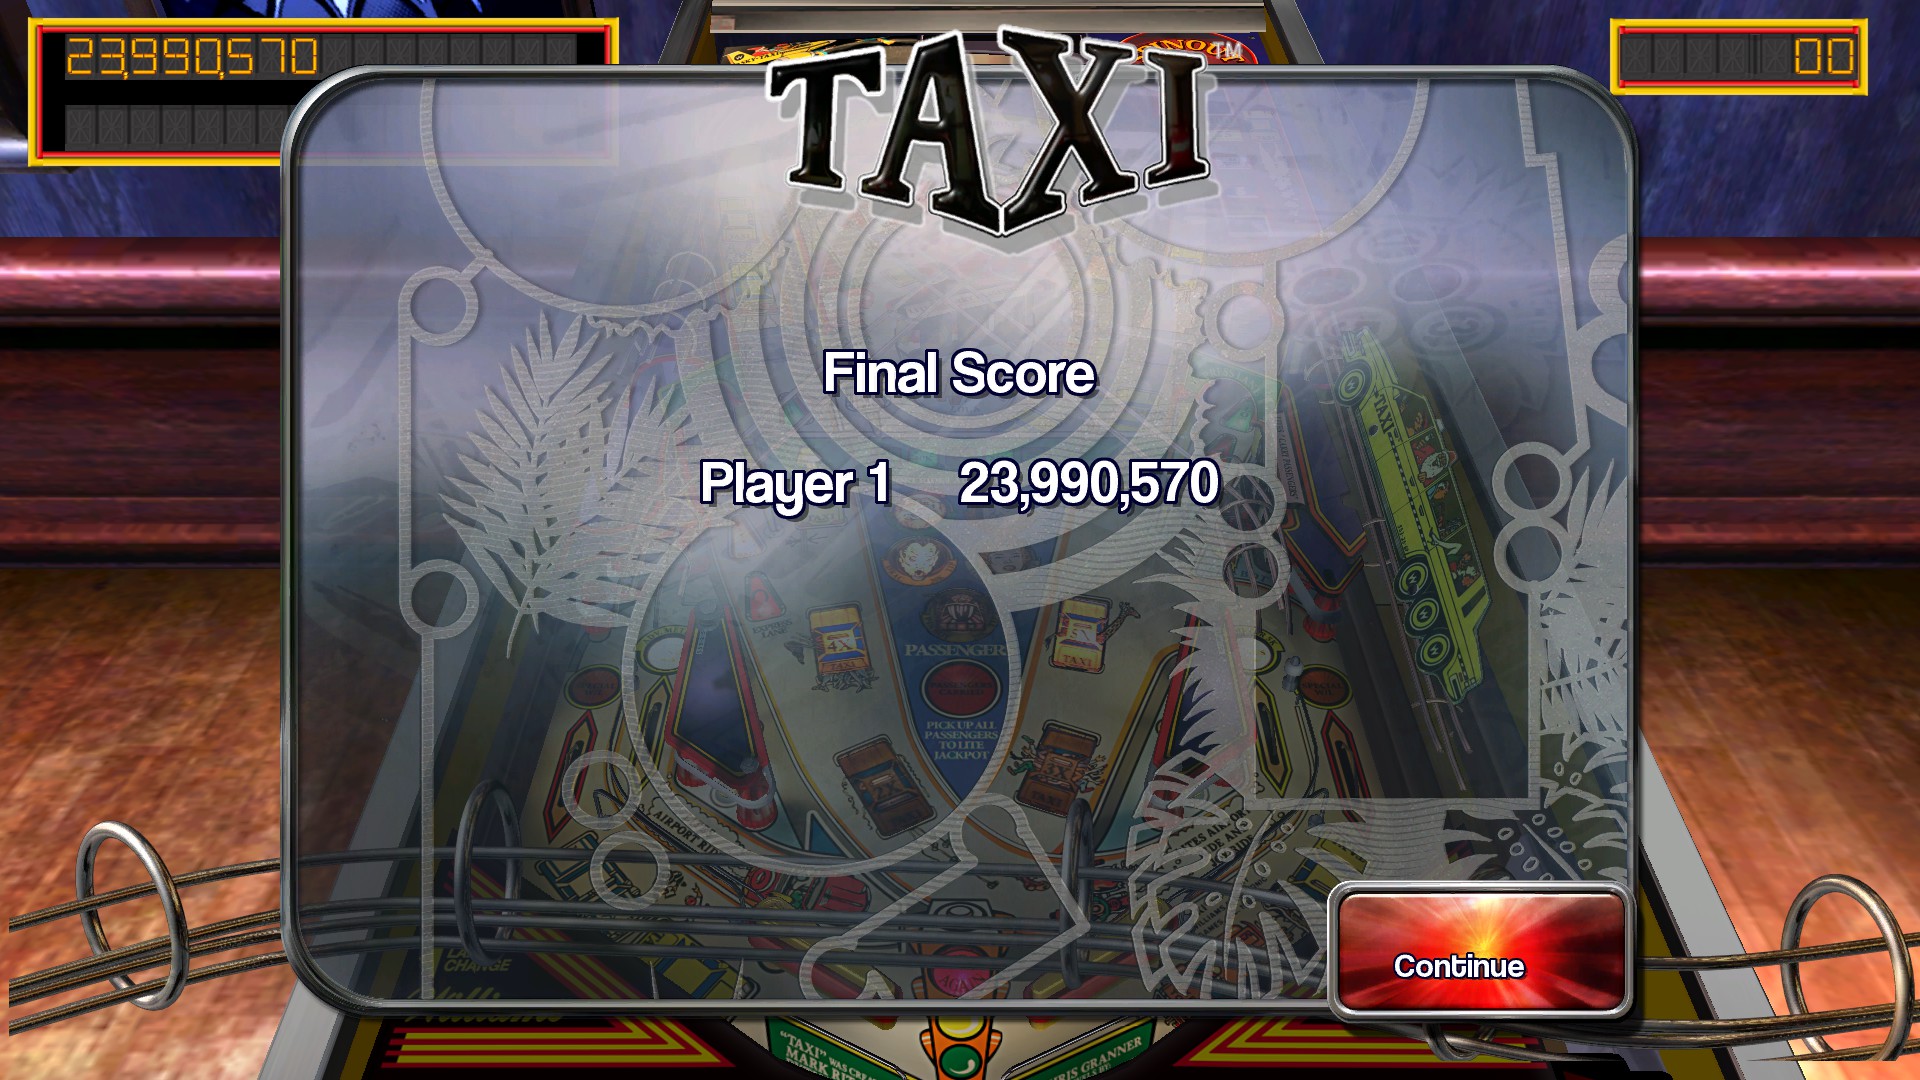 TheTrickster: Pinball Arcade: Taxi (PC) 23,990,570 points on 2016-03-02 06:36:13